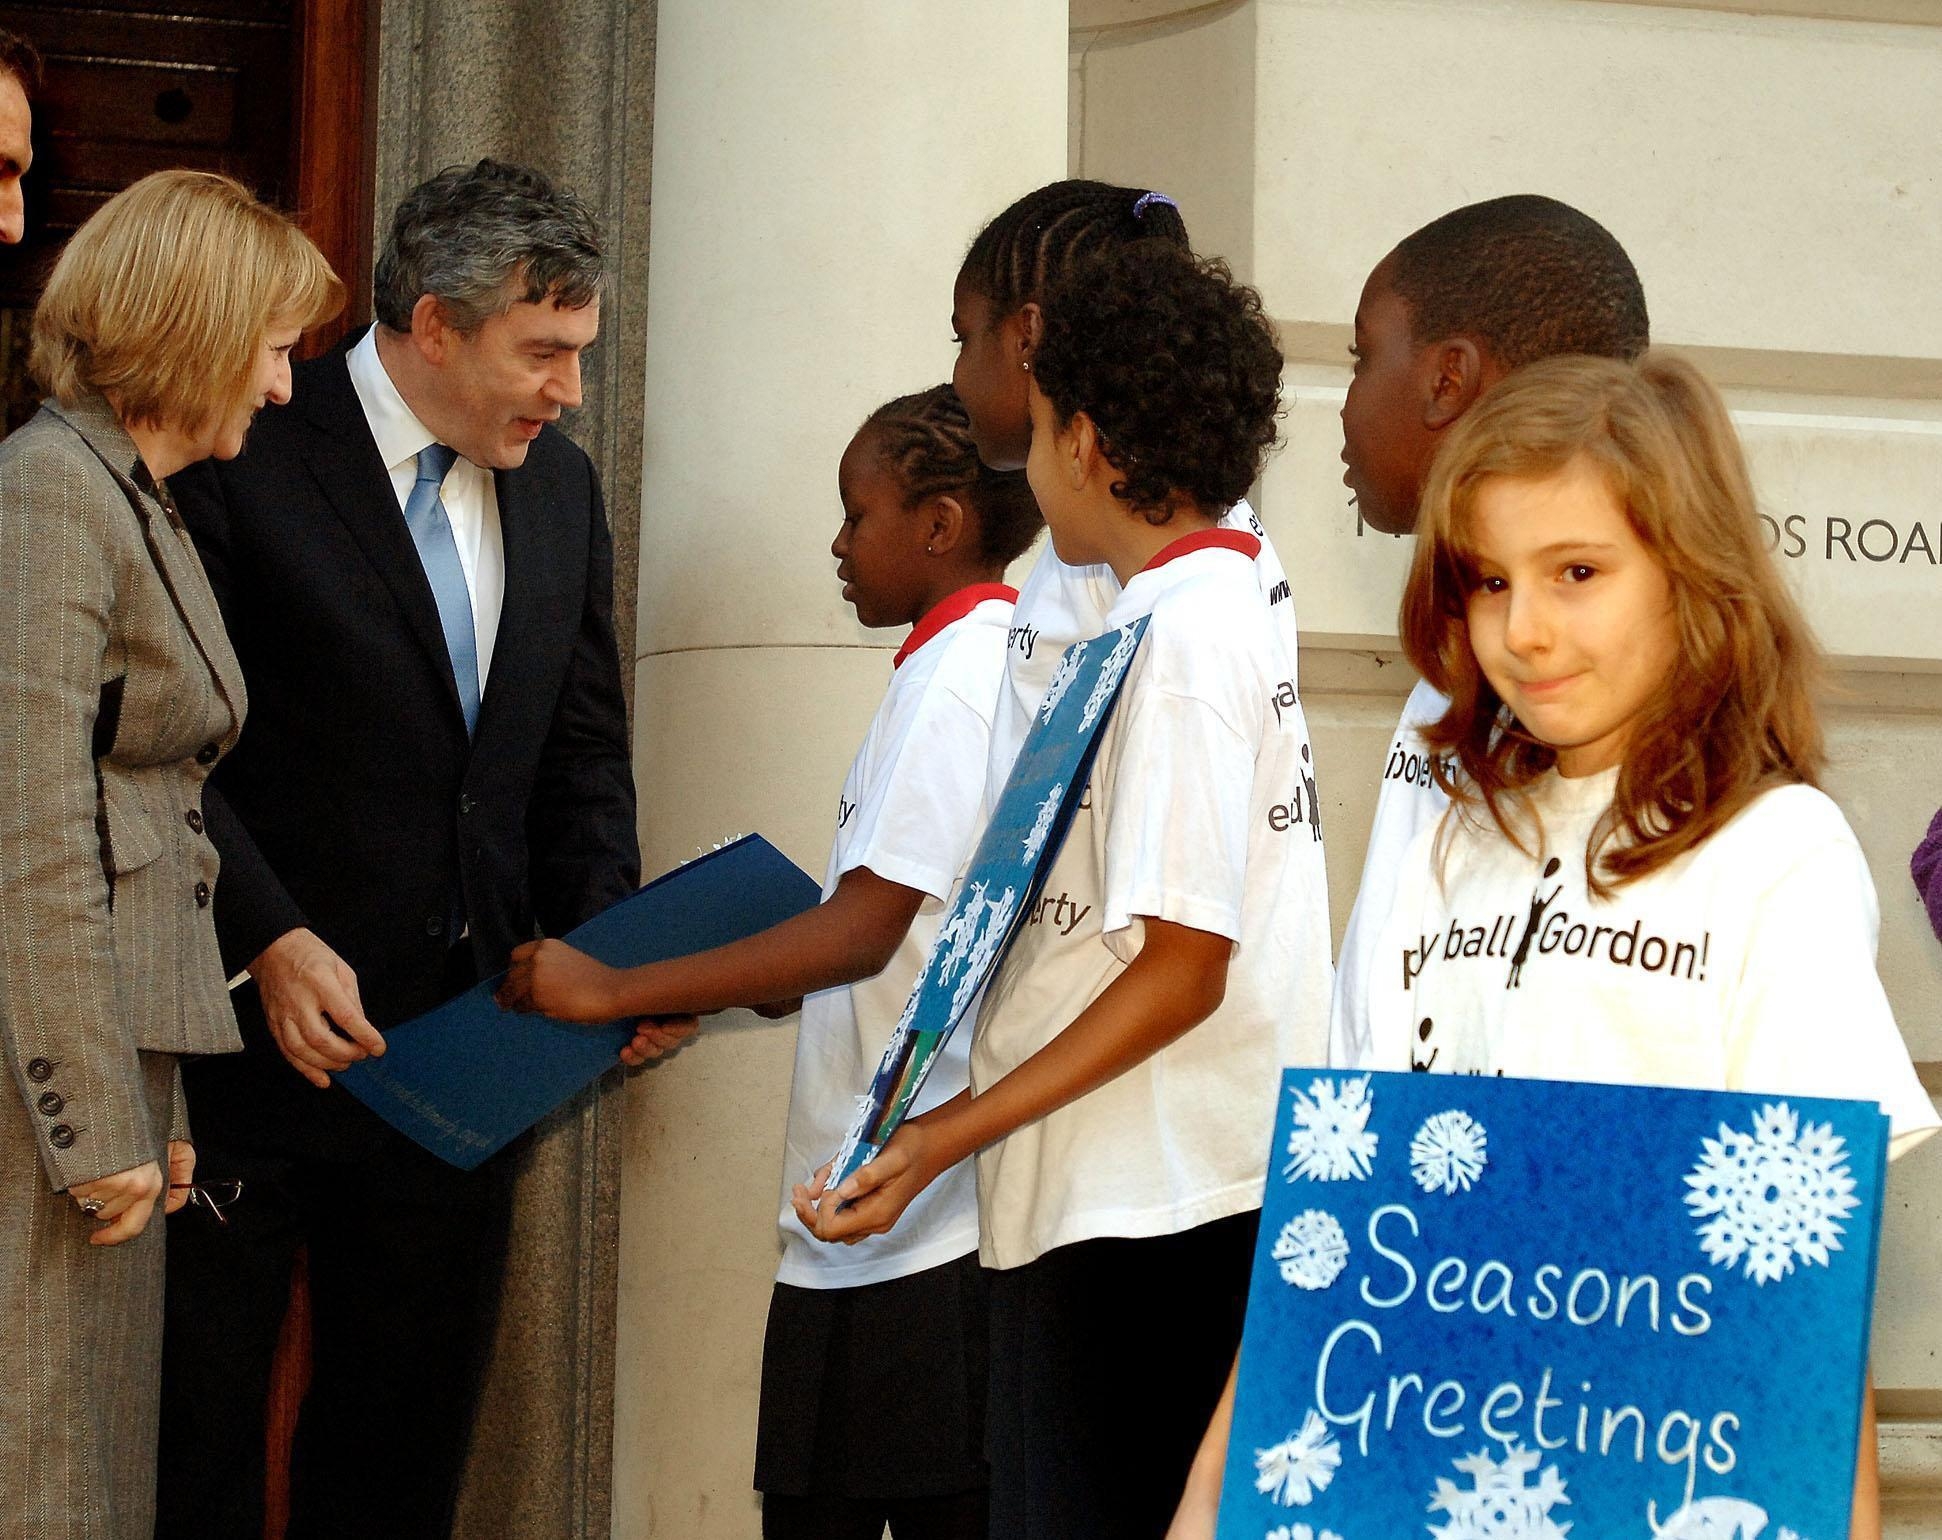 Bev and Gordon Brown talking to young people about the End Child Poverty Campaign